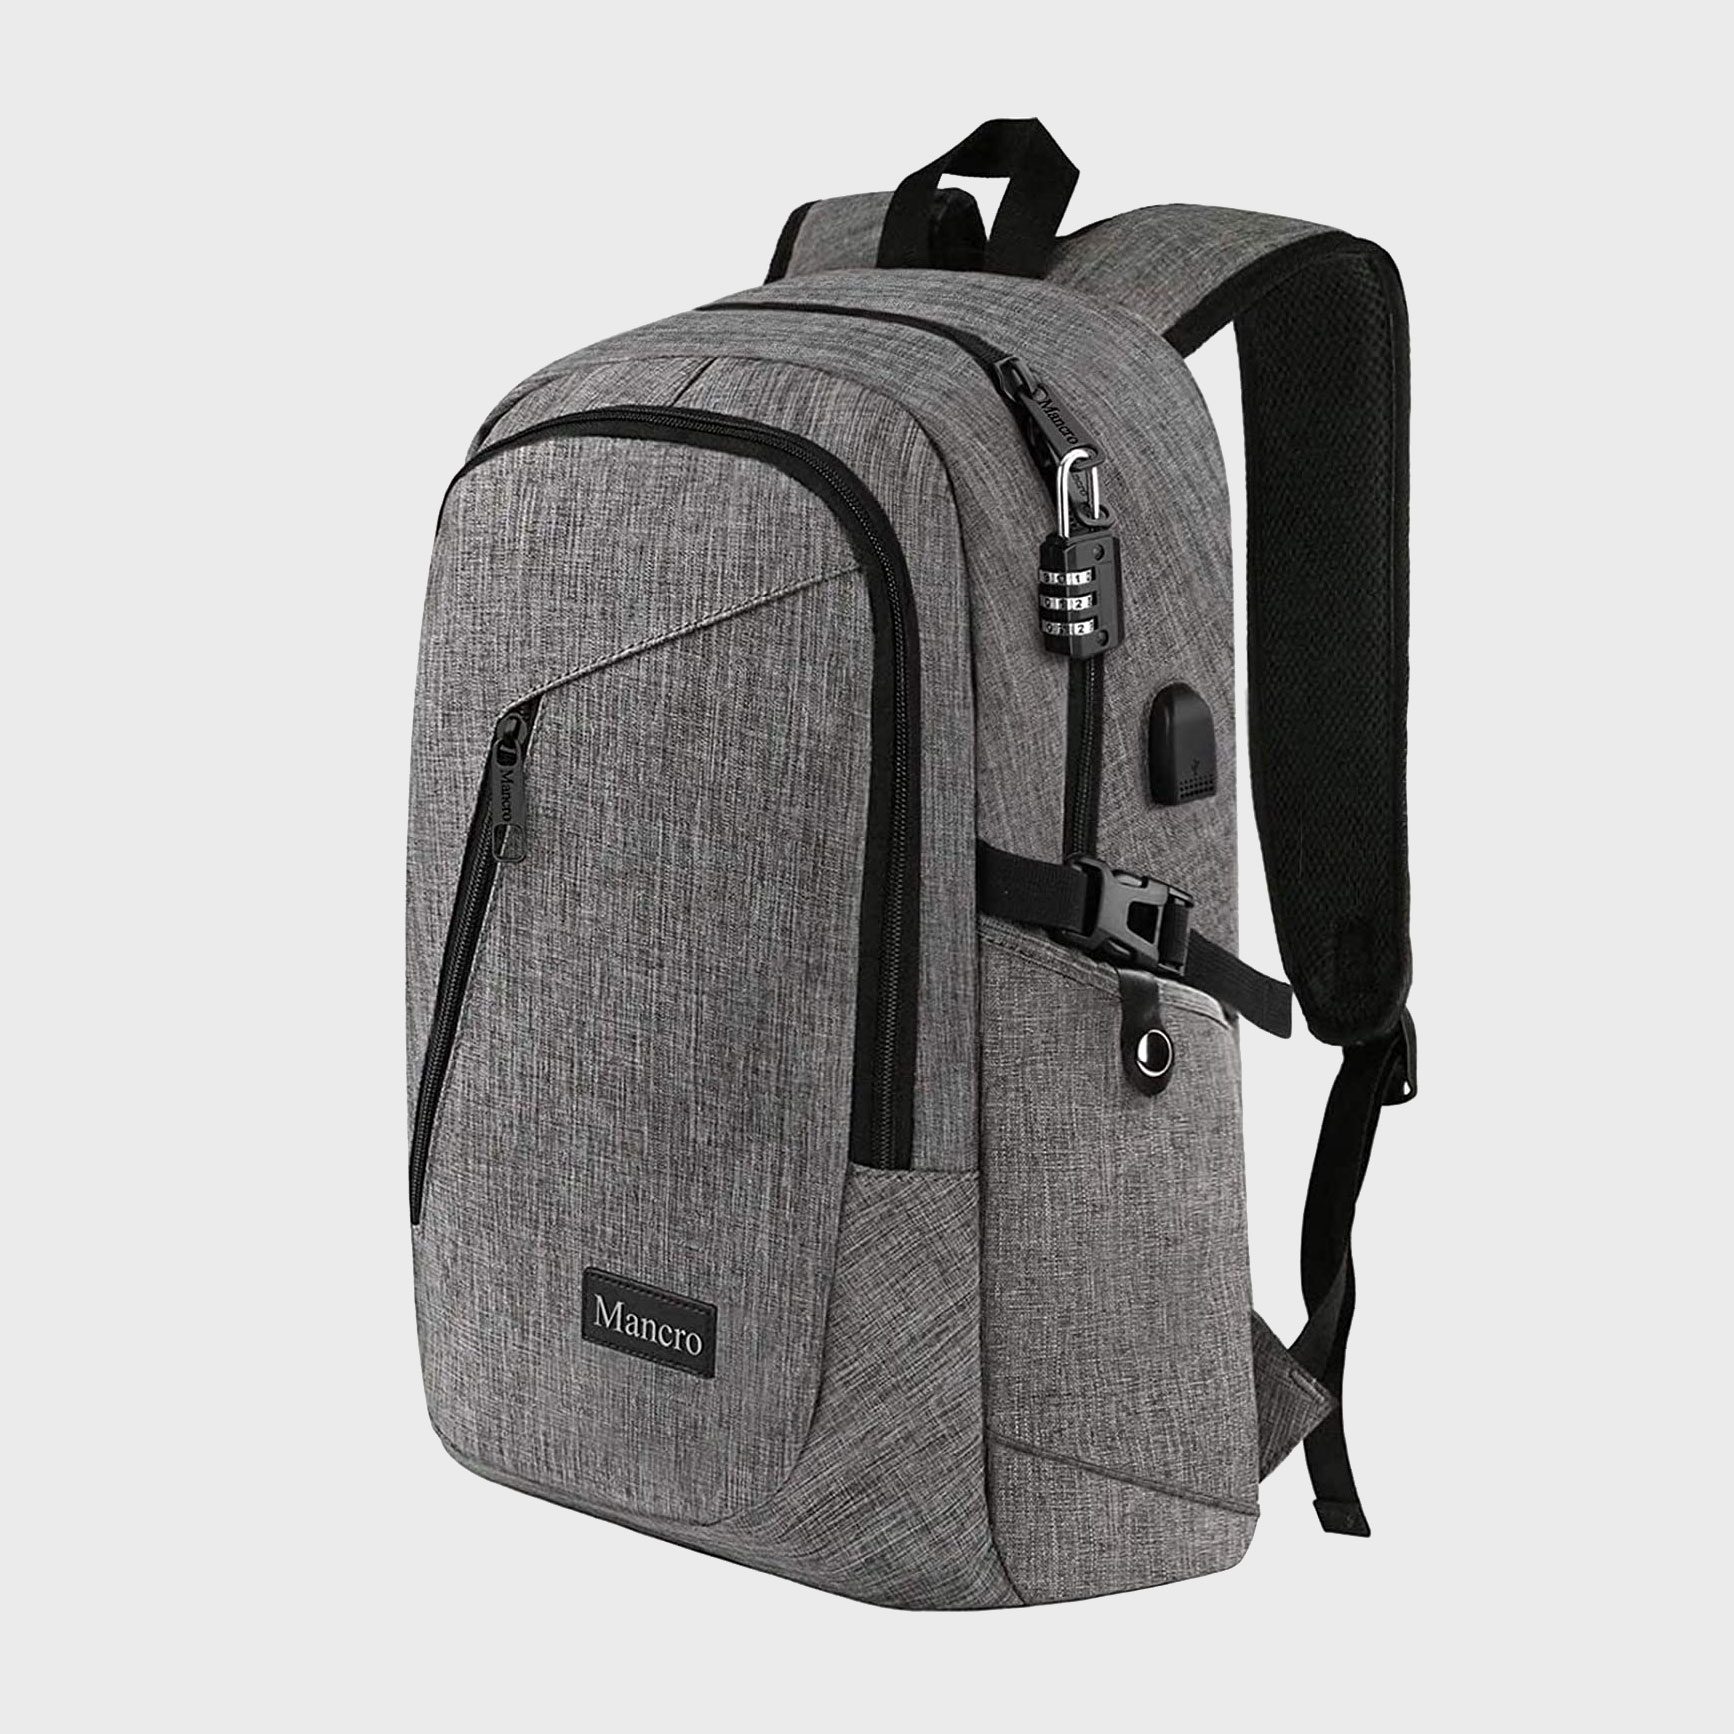 Best Laptop Backpacks at Every Price Point | Reader's Digest